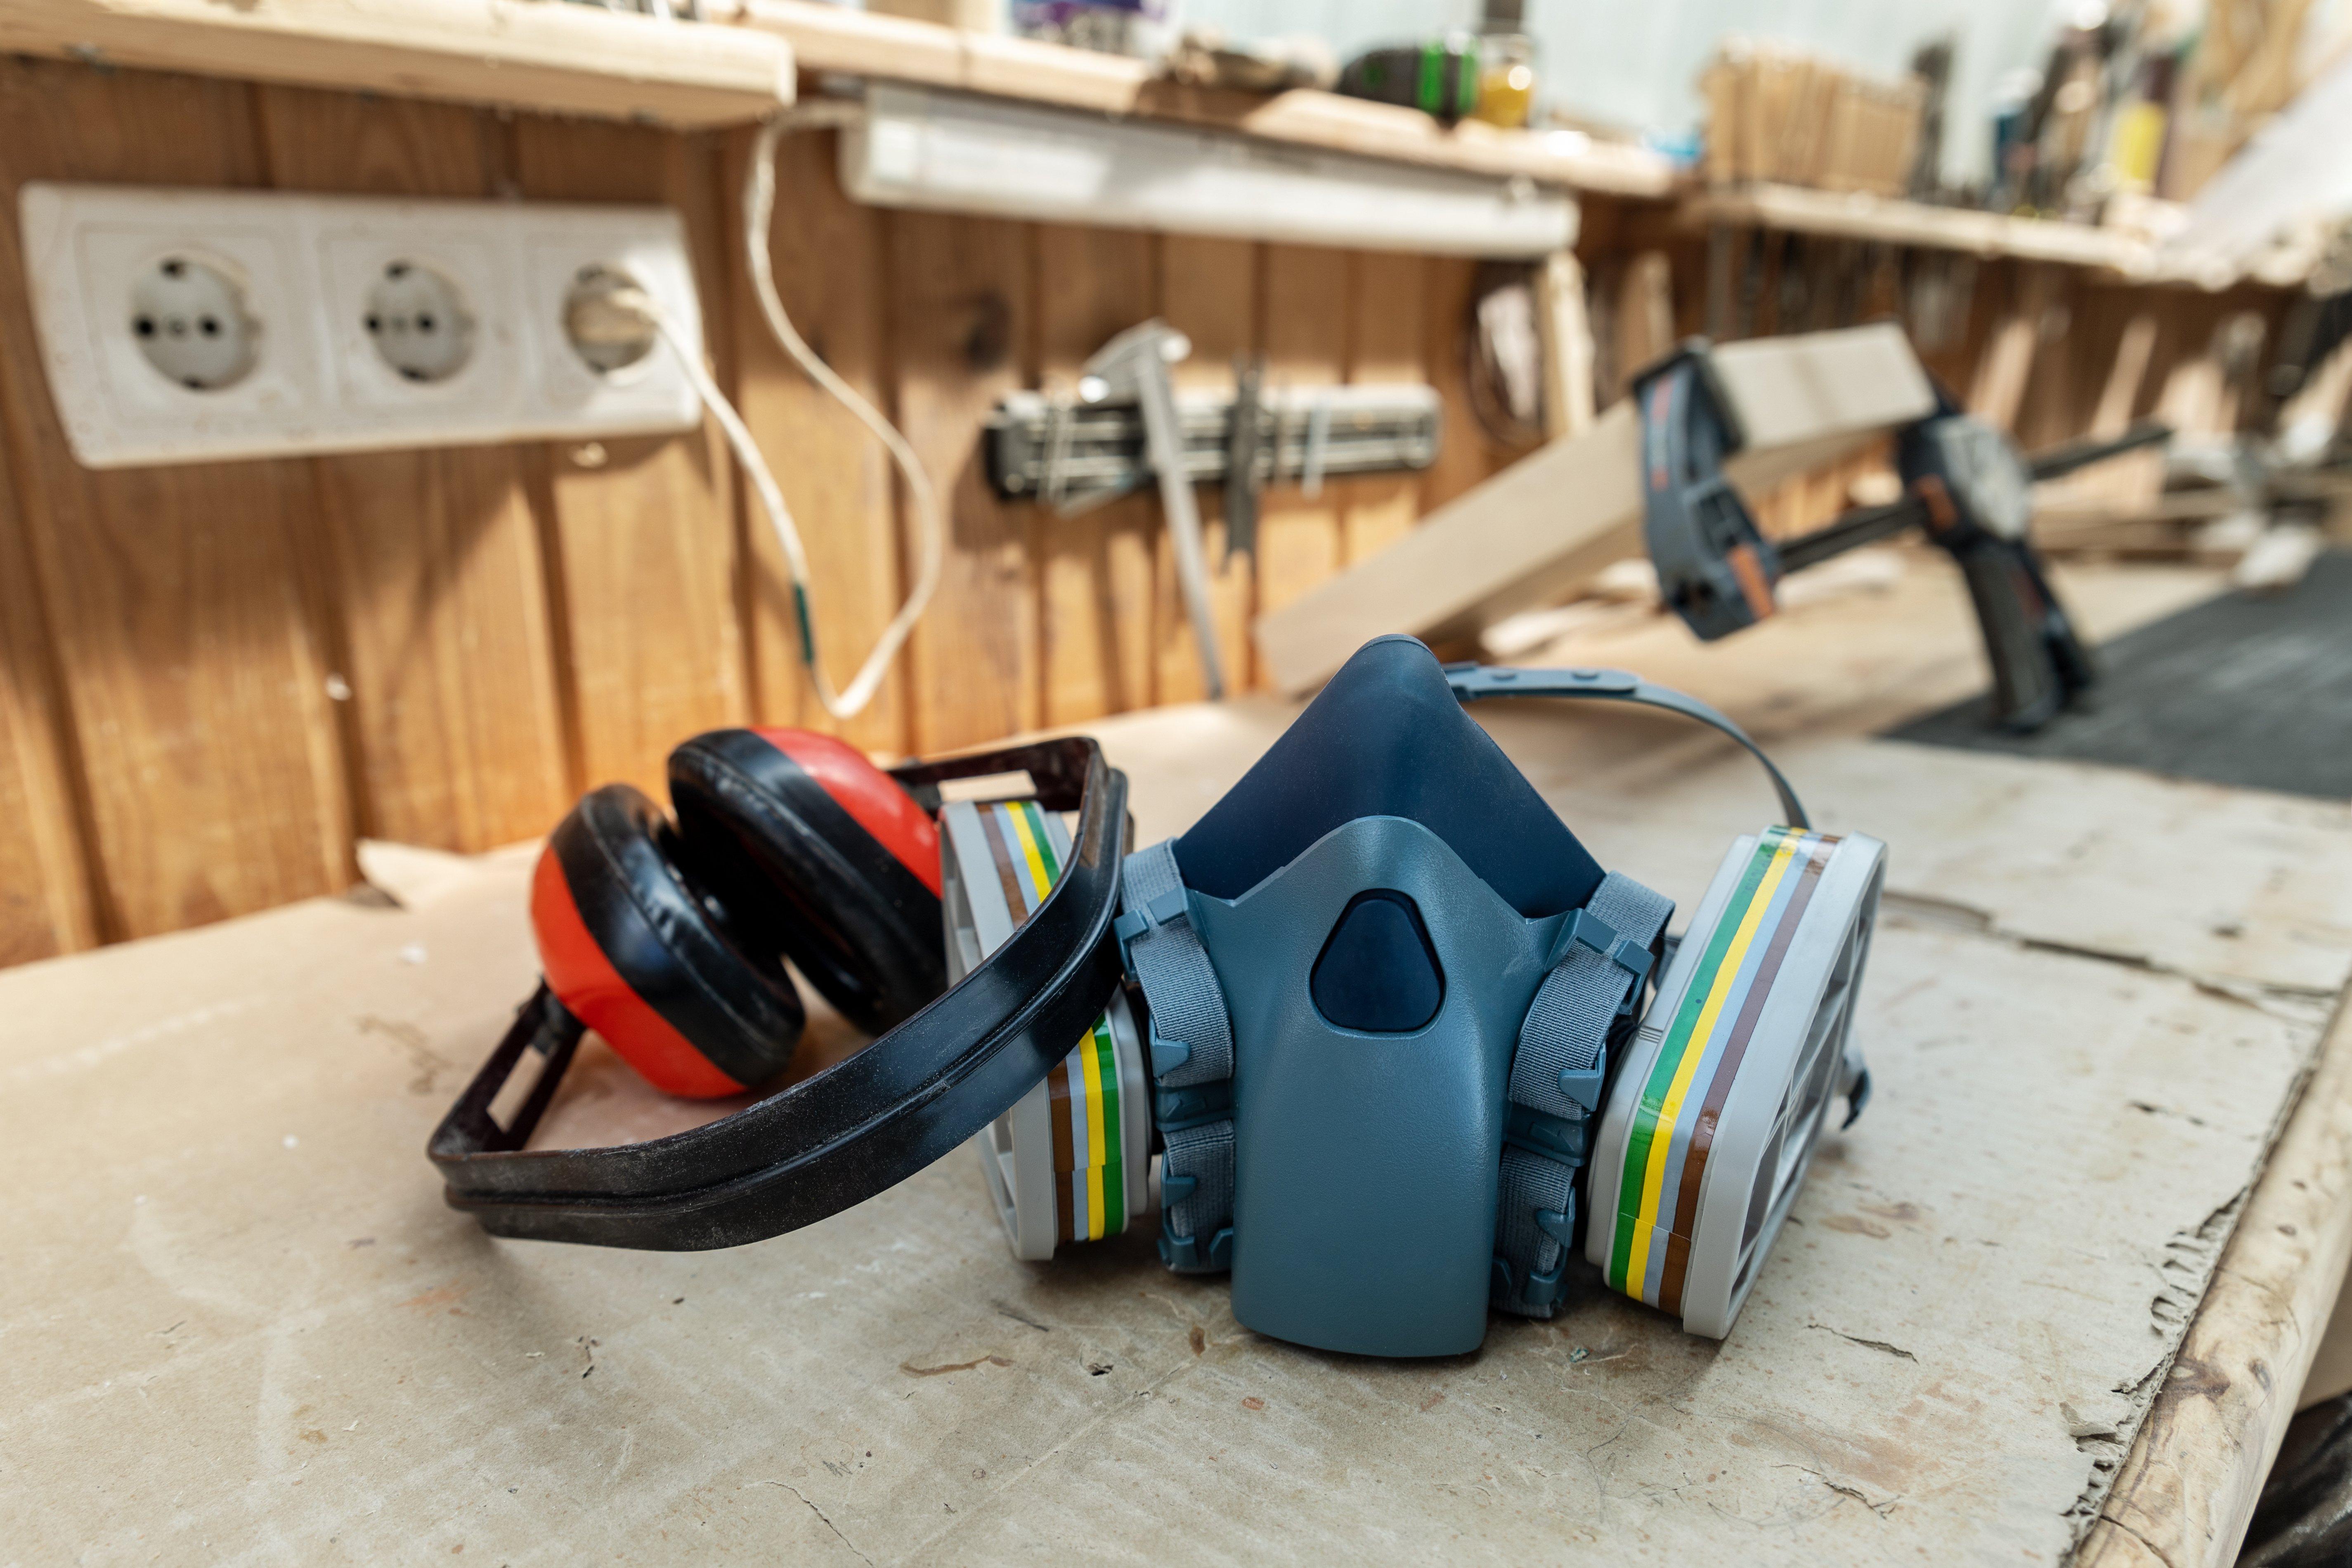 A PPE respirator half face mask and ear protection equipment lie on a wooden carpentry workbench.